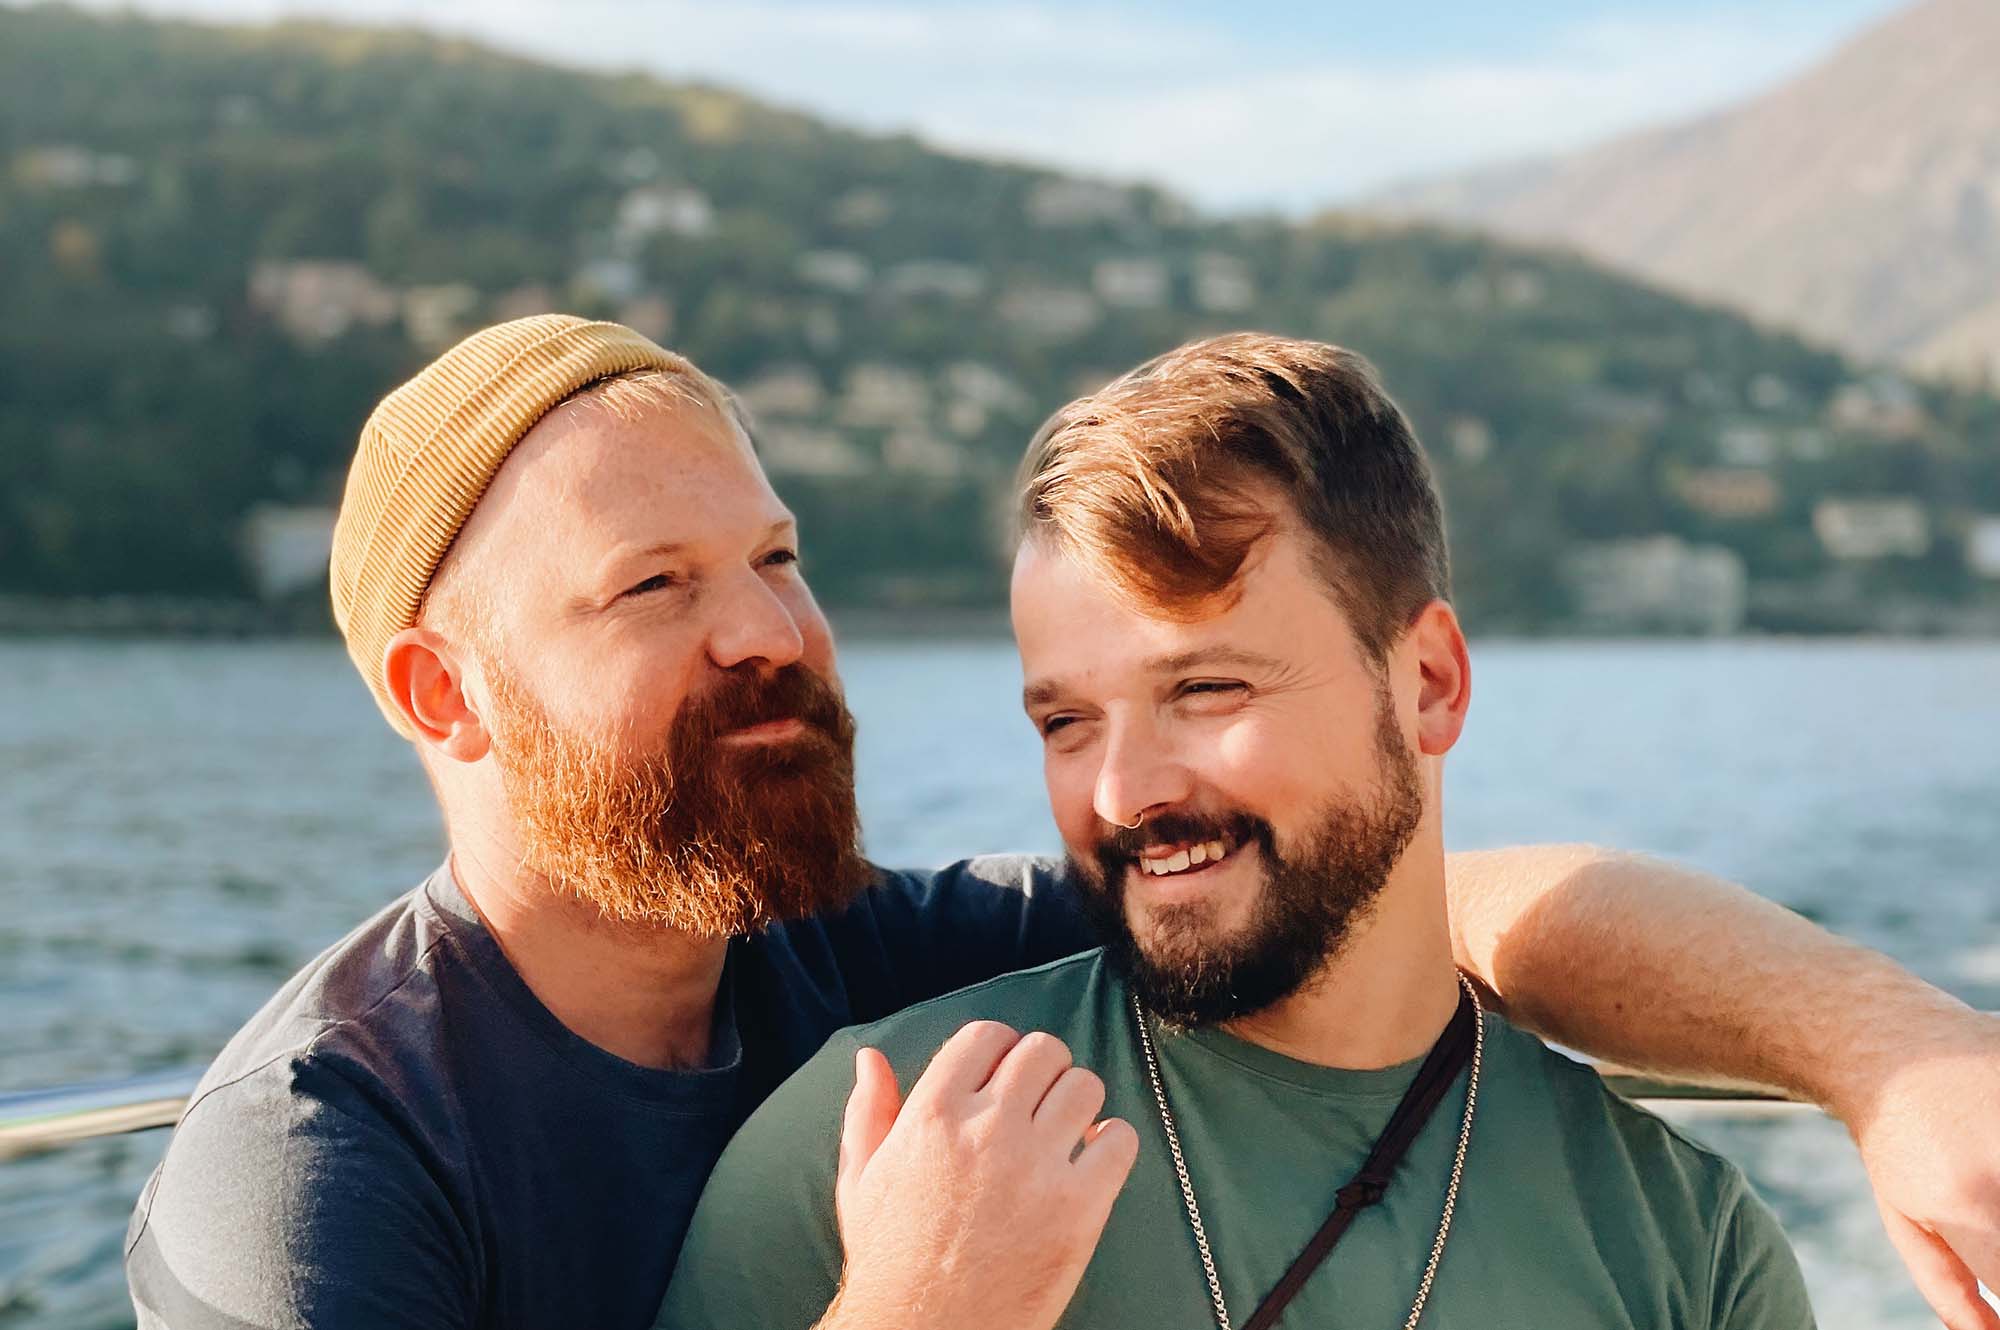 Karl and Daan, the gay couple of the Gay Travel Blog "Couple of Men" © Coupleofmen.com